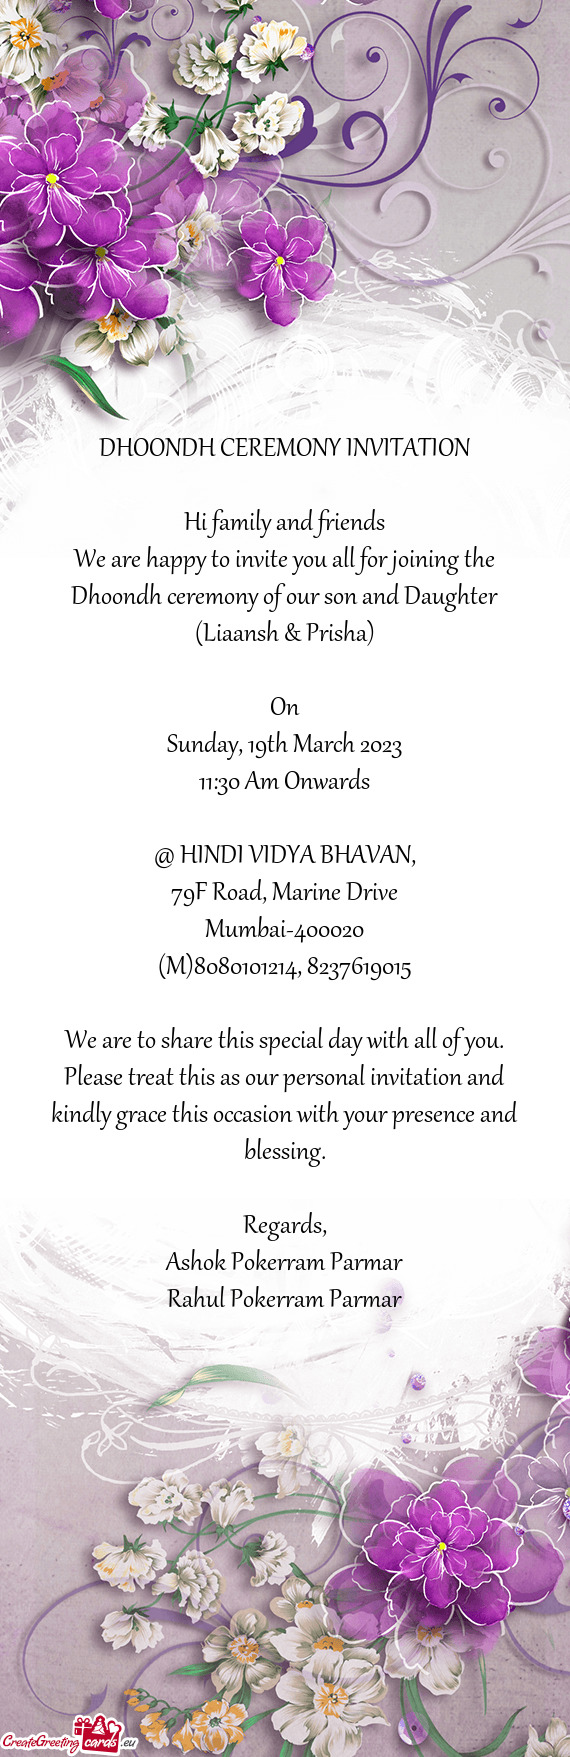 We are happy to invite you all for joining the Dhoondh ceremony of our son and Daughter (Liaansh & P